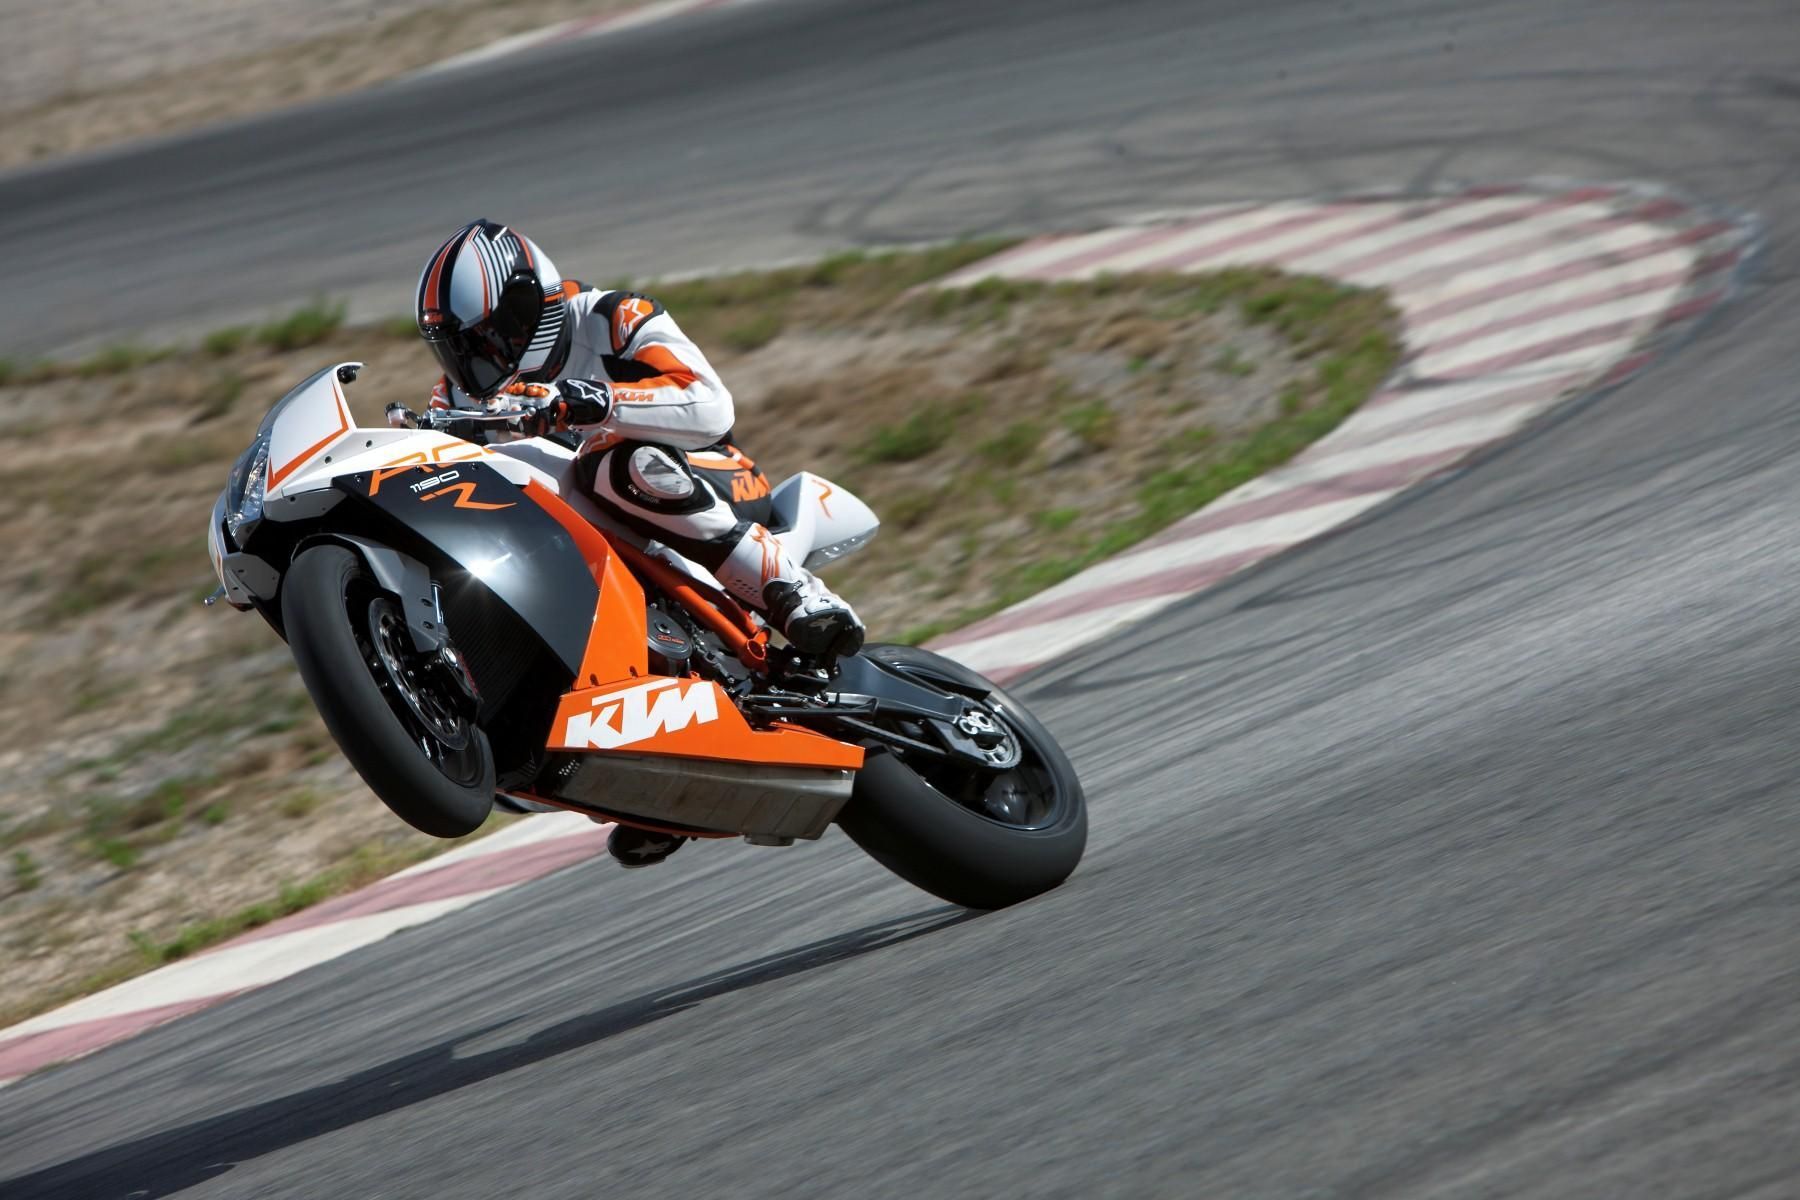 2013 KTM 1190 RC8 R in action 4